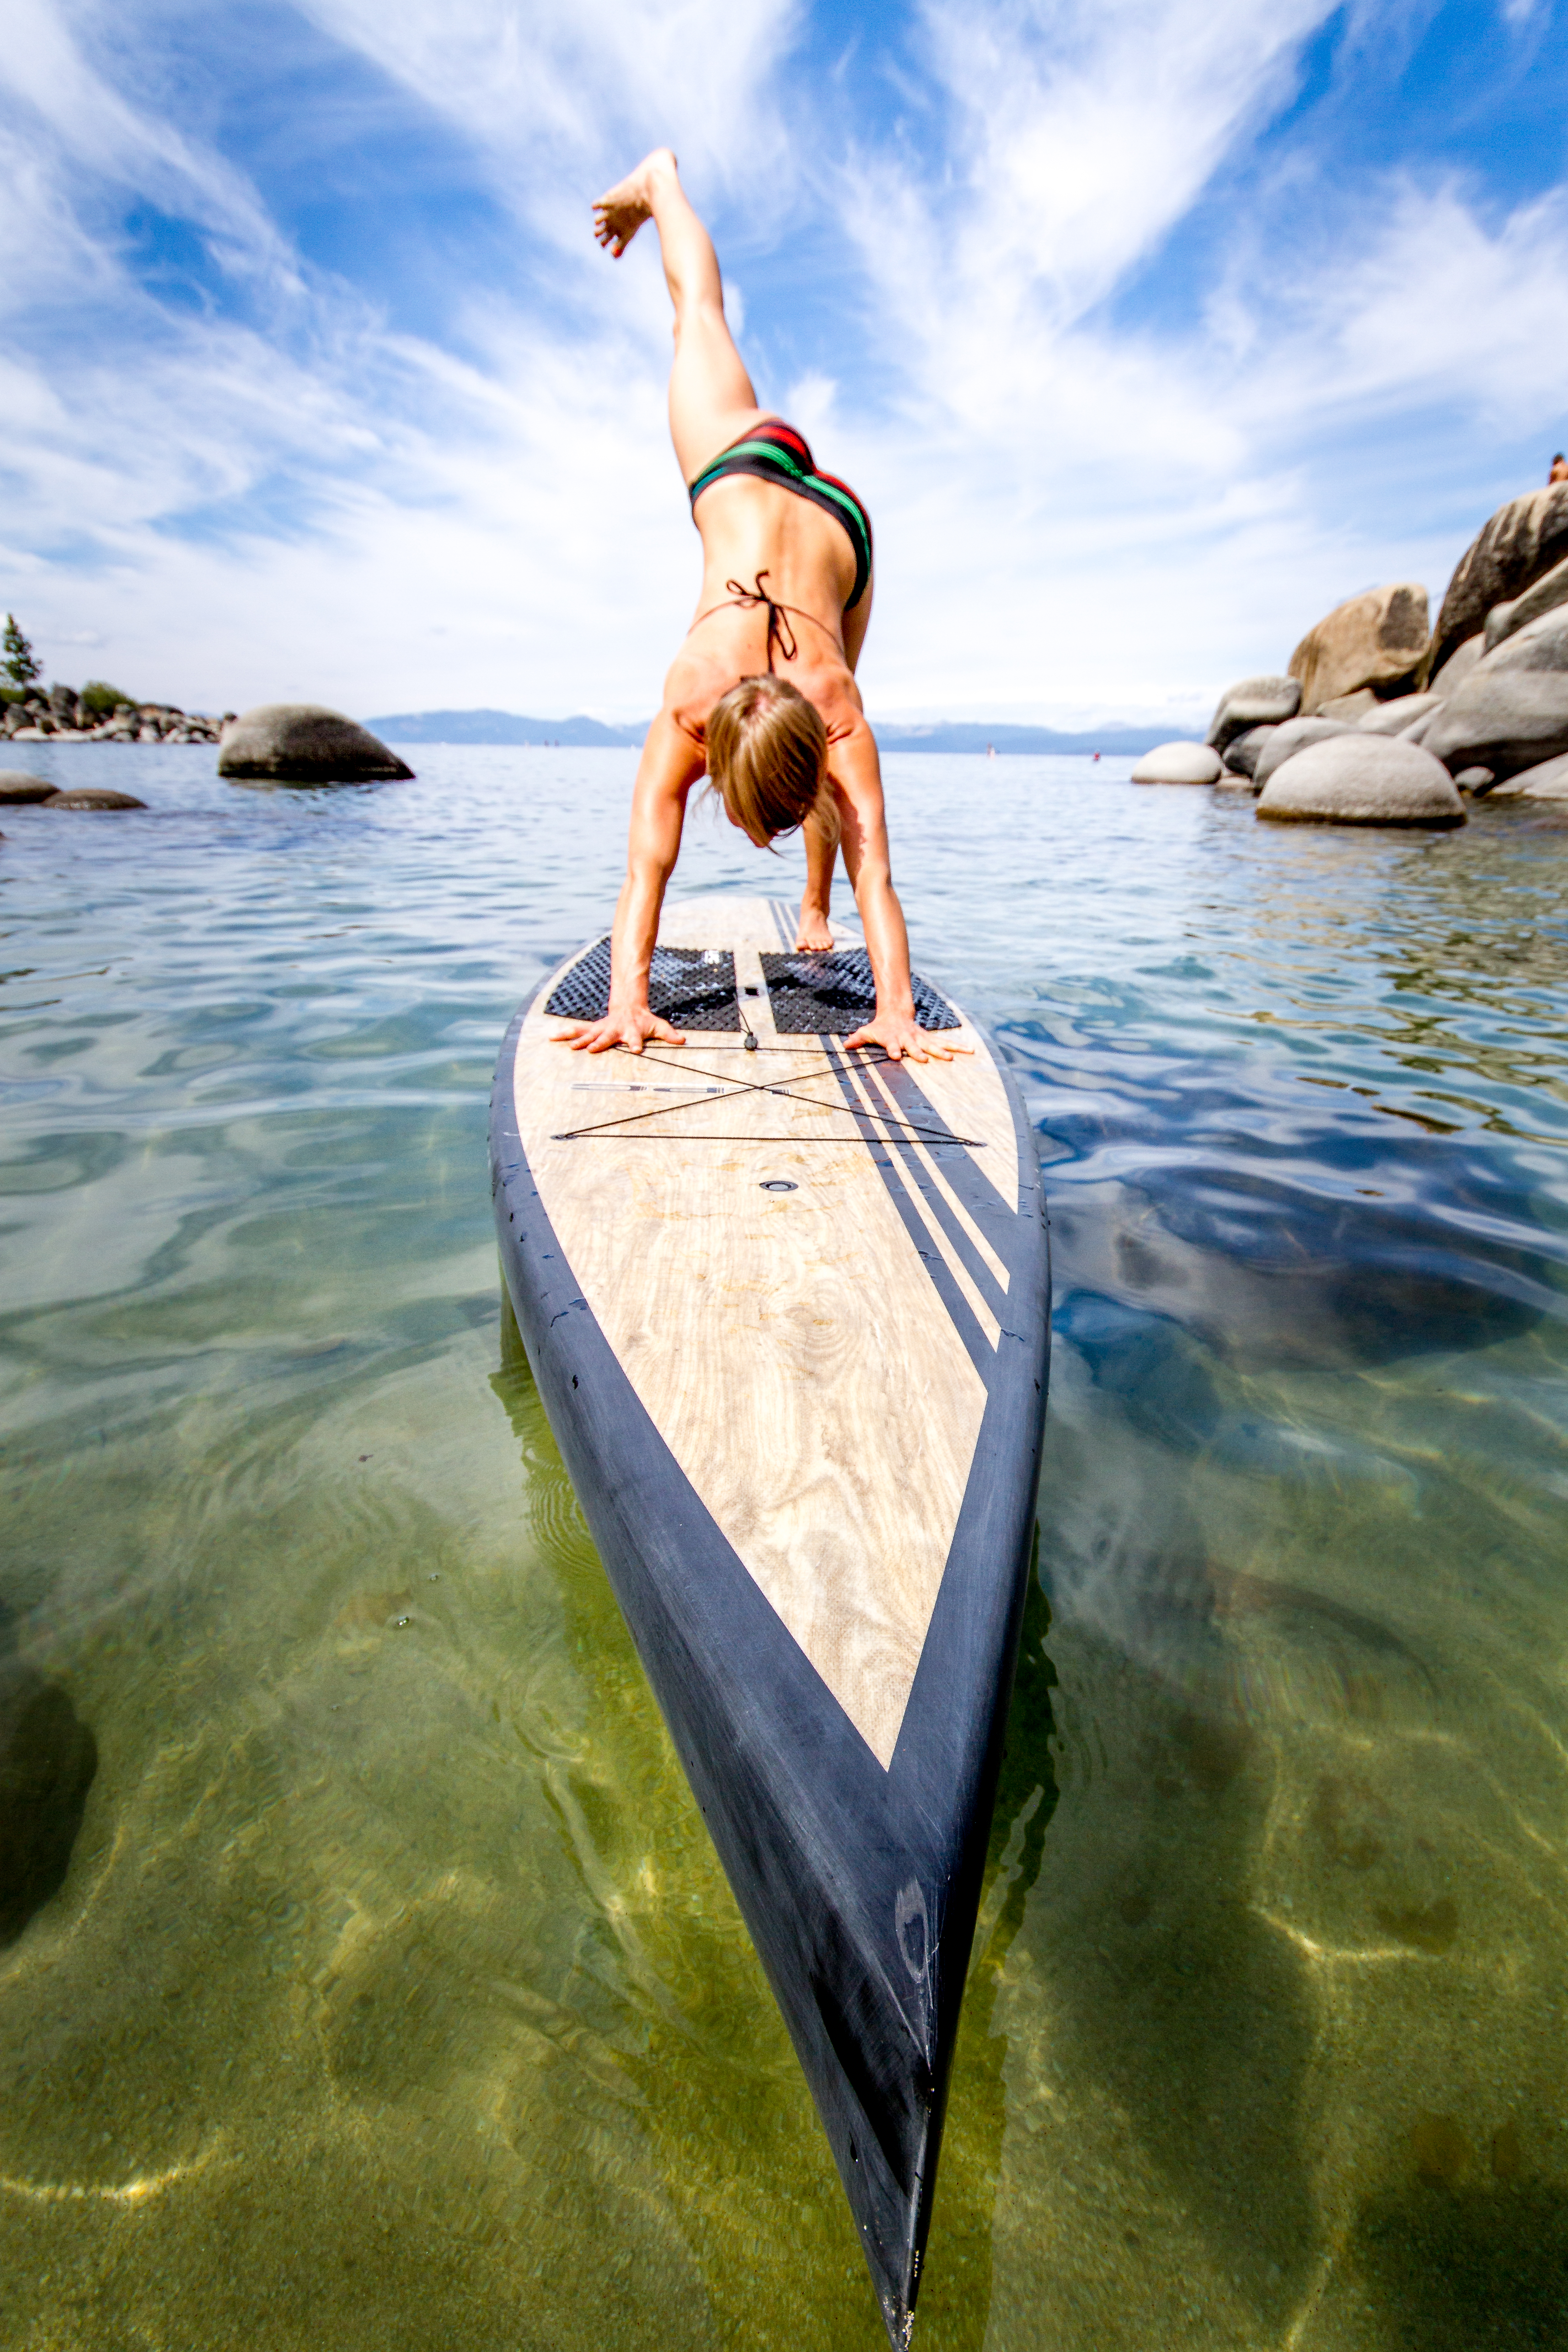 Indoor SUP Yoga Moves the Paddleboard to the Studio - DoYou